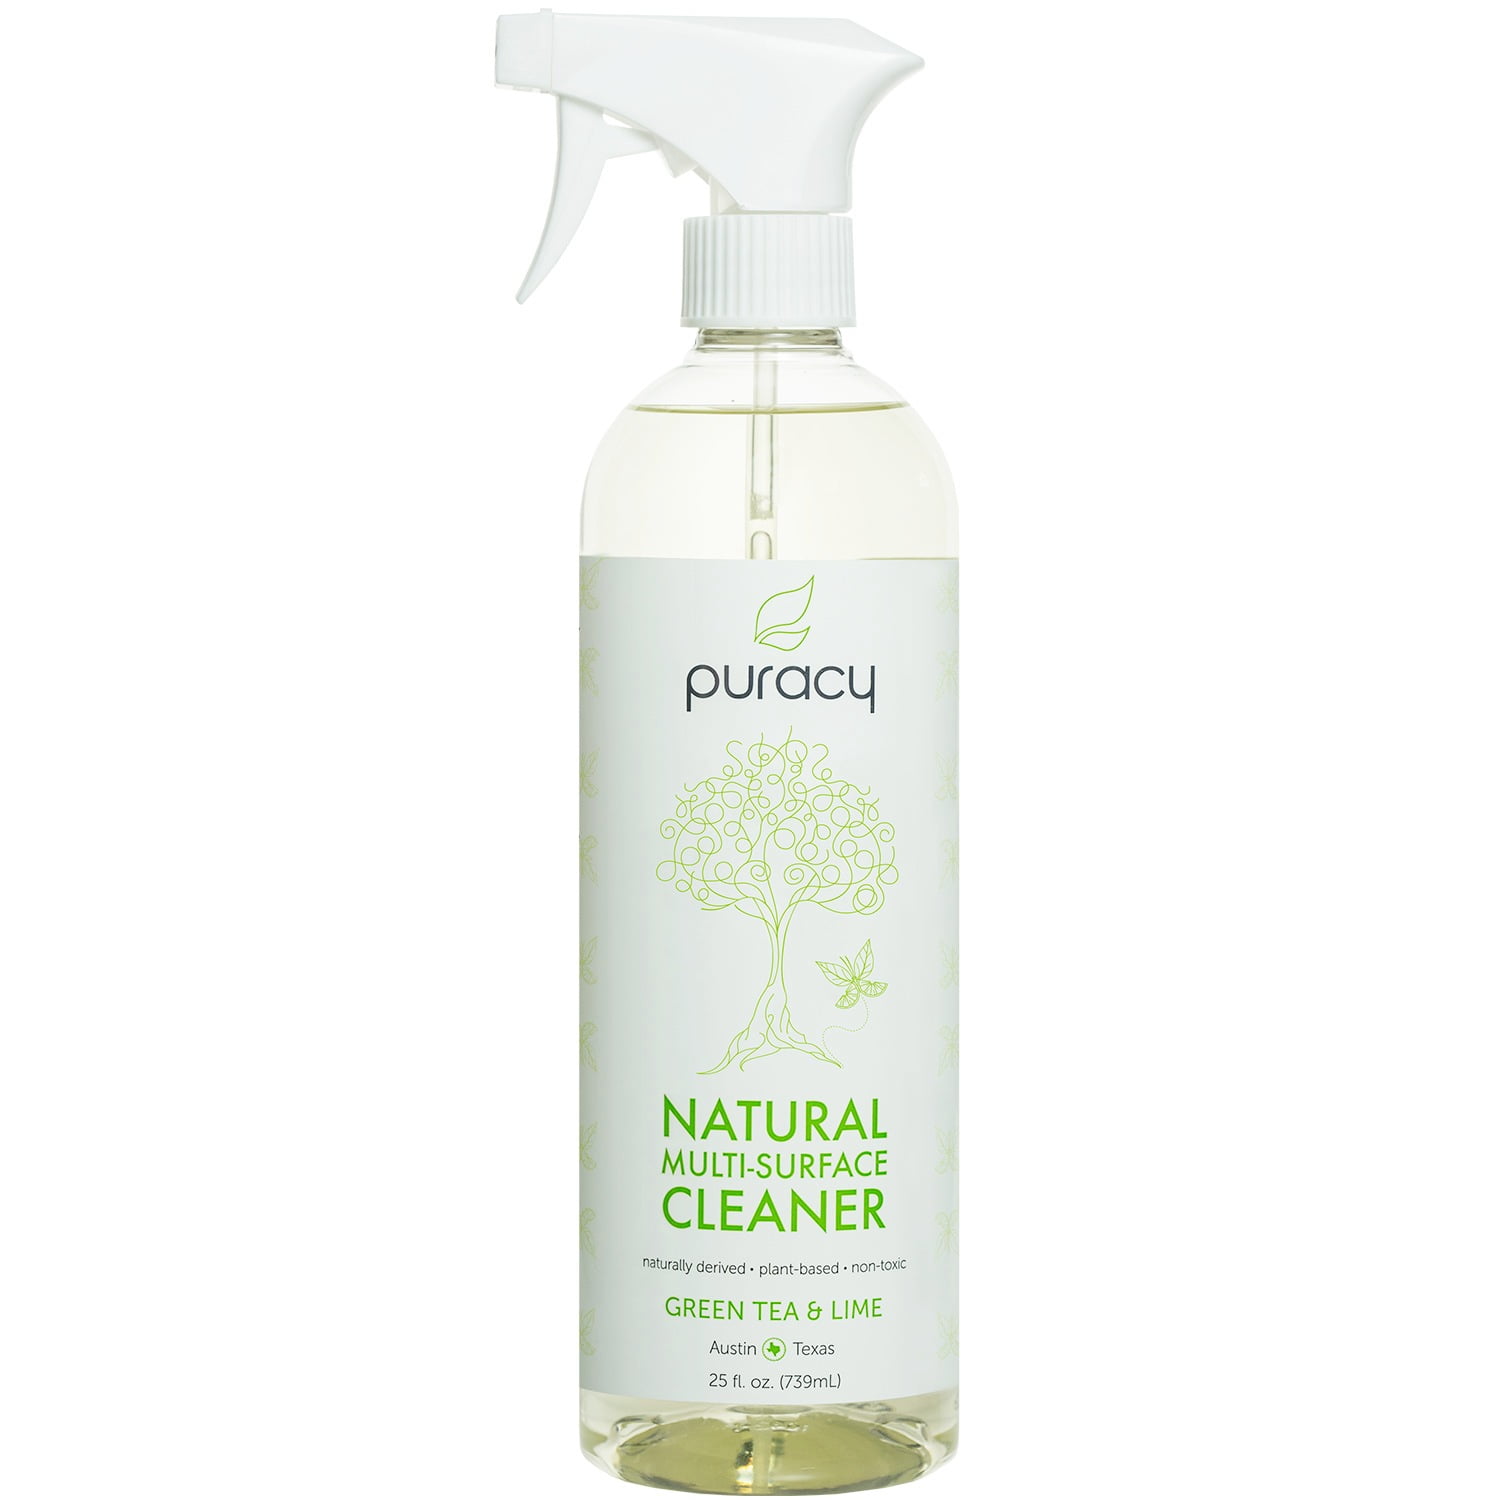 Buy Puracy Natural Multi-Surface Cleaner - Green Tea & Lime at Walm...